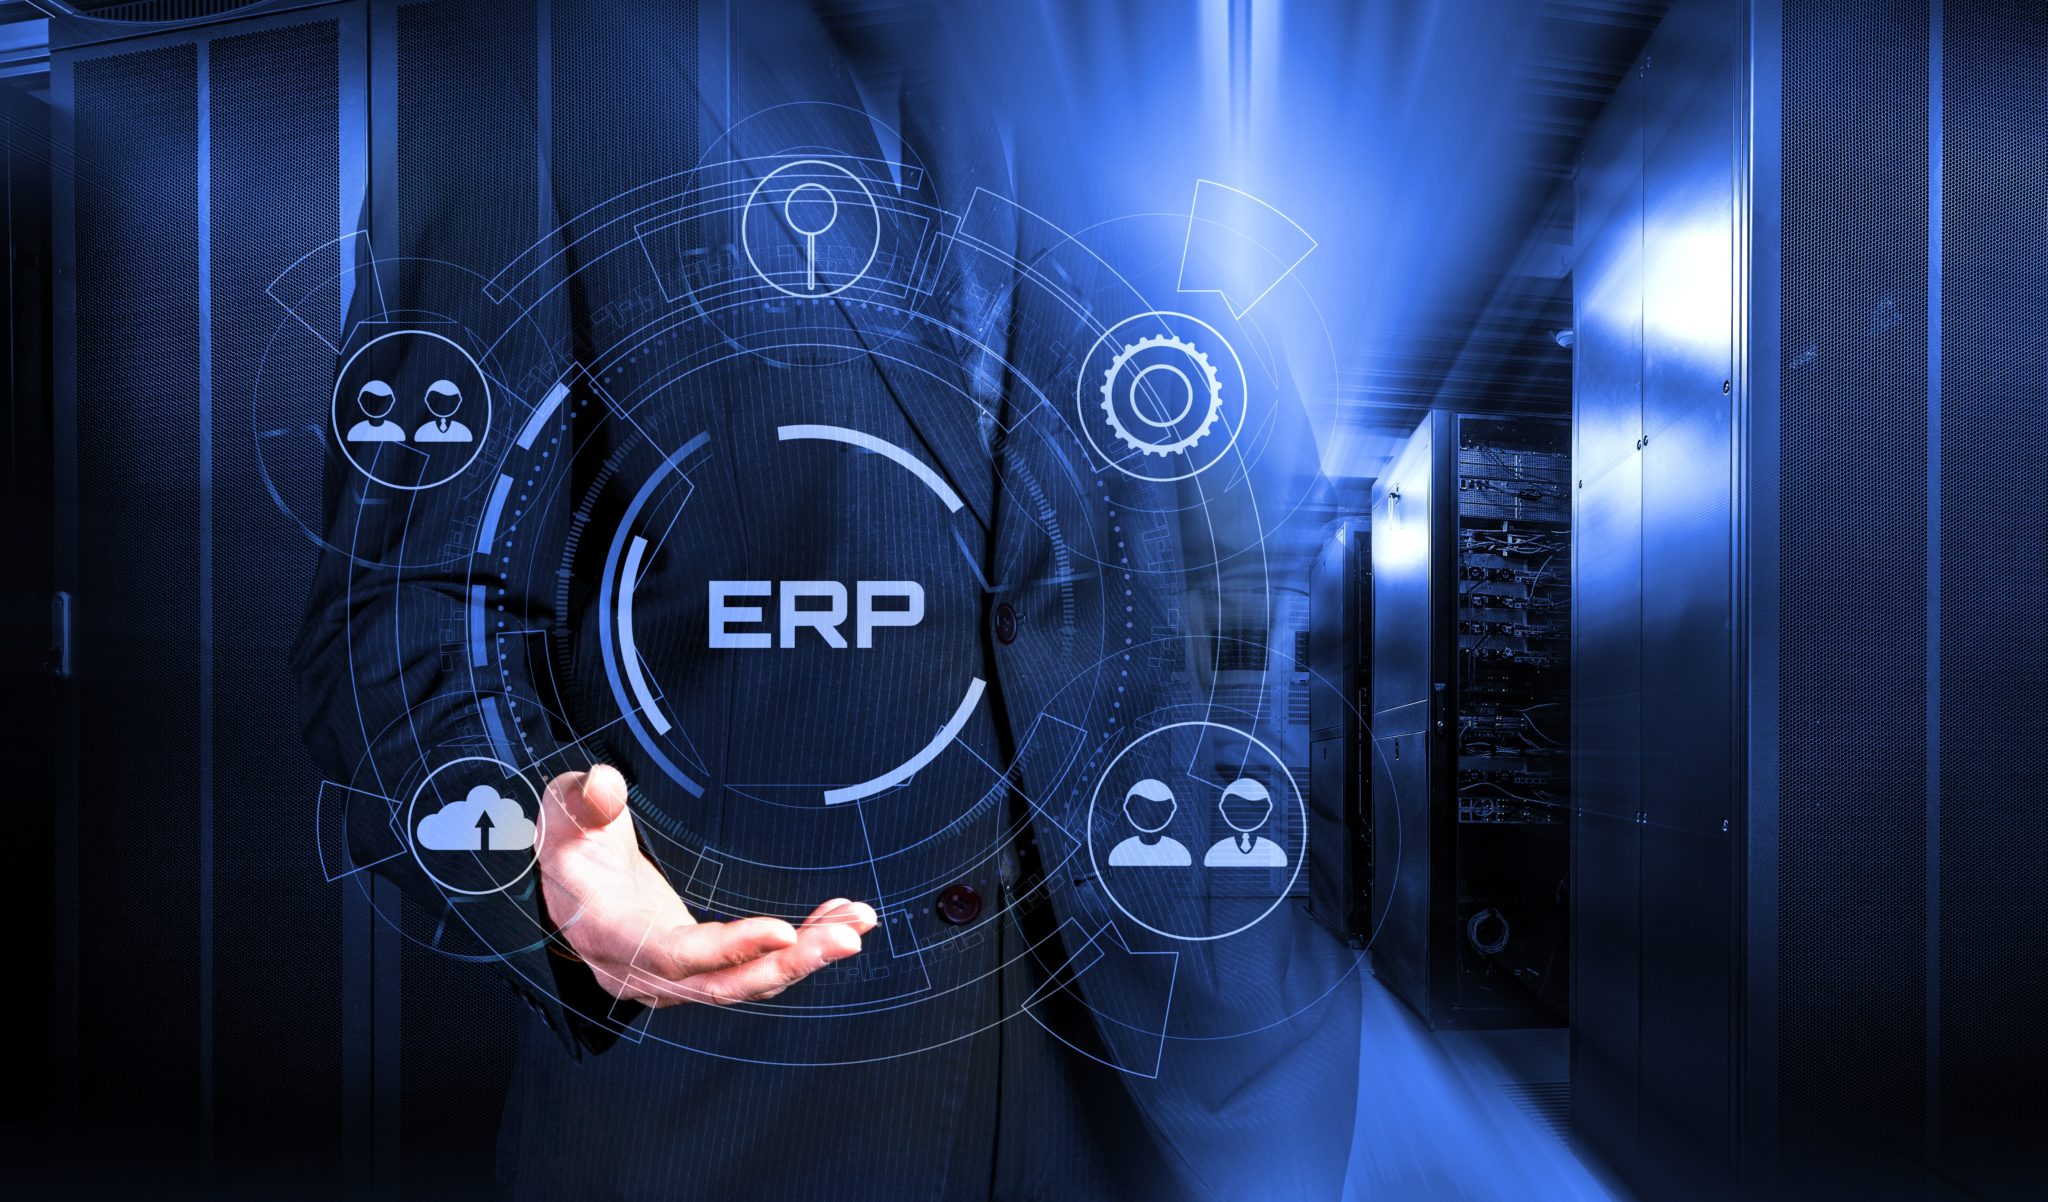 a man in a suit is touching the erp button